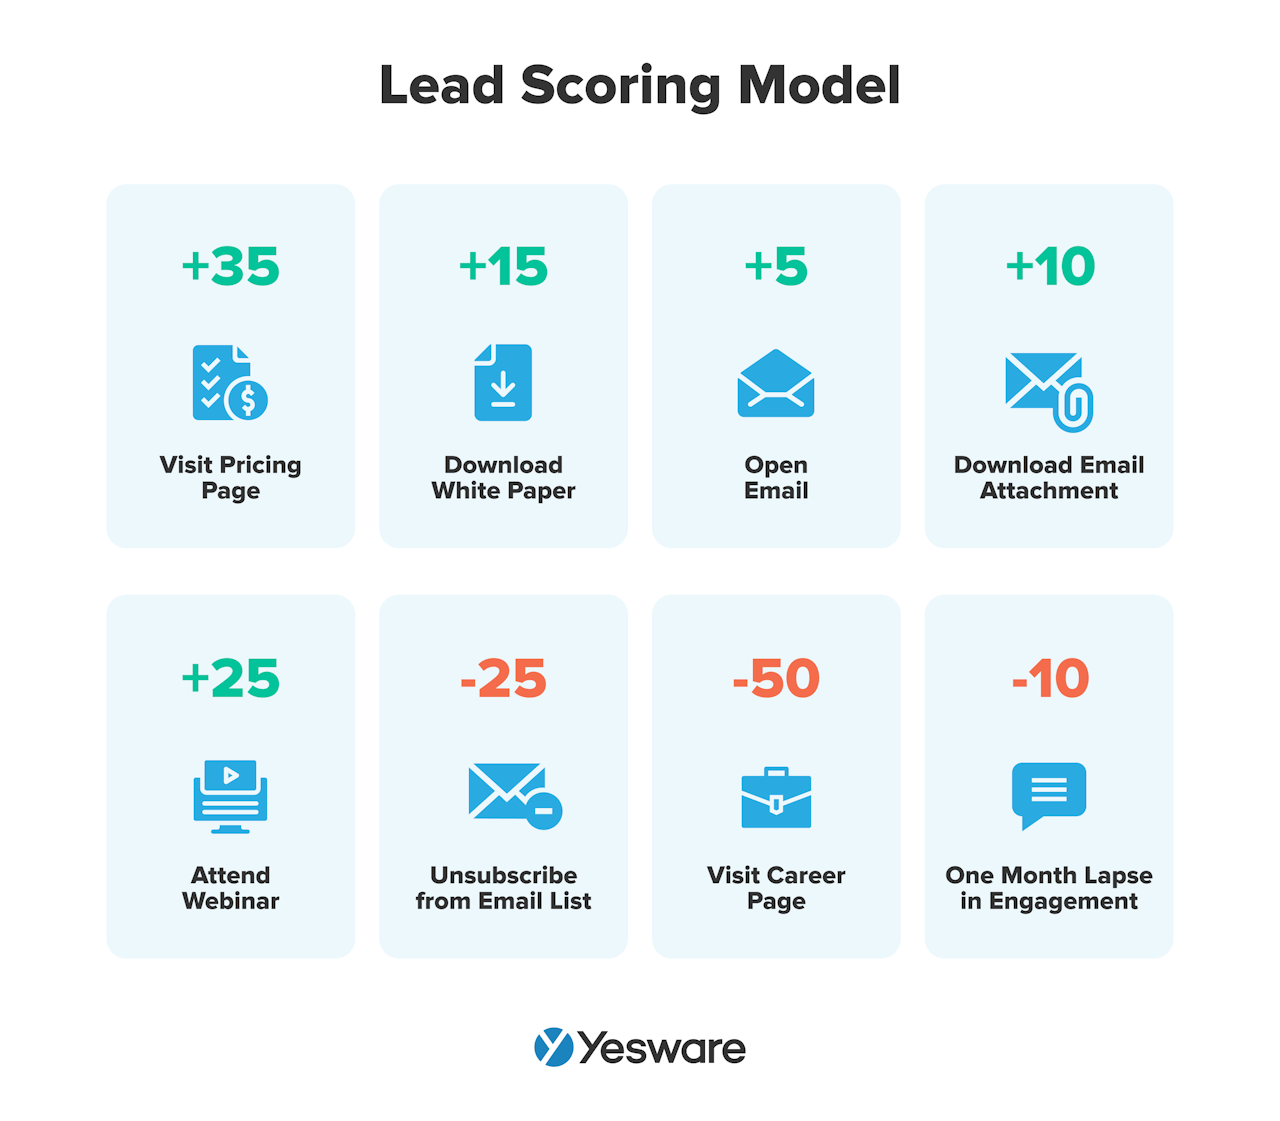 lead scoring model: online behavioral and email engagement